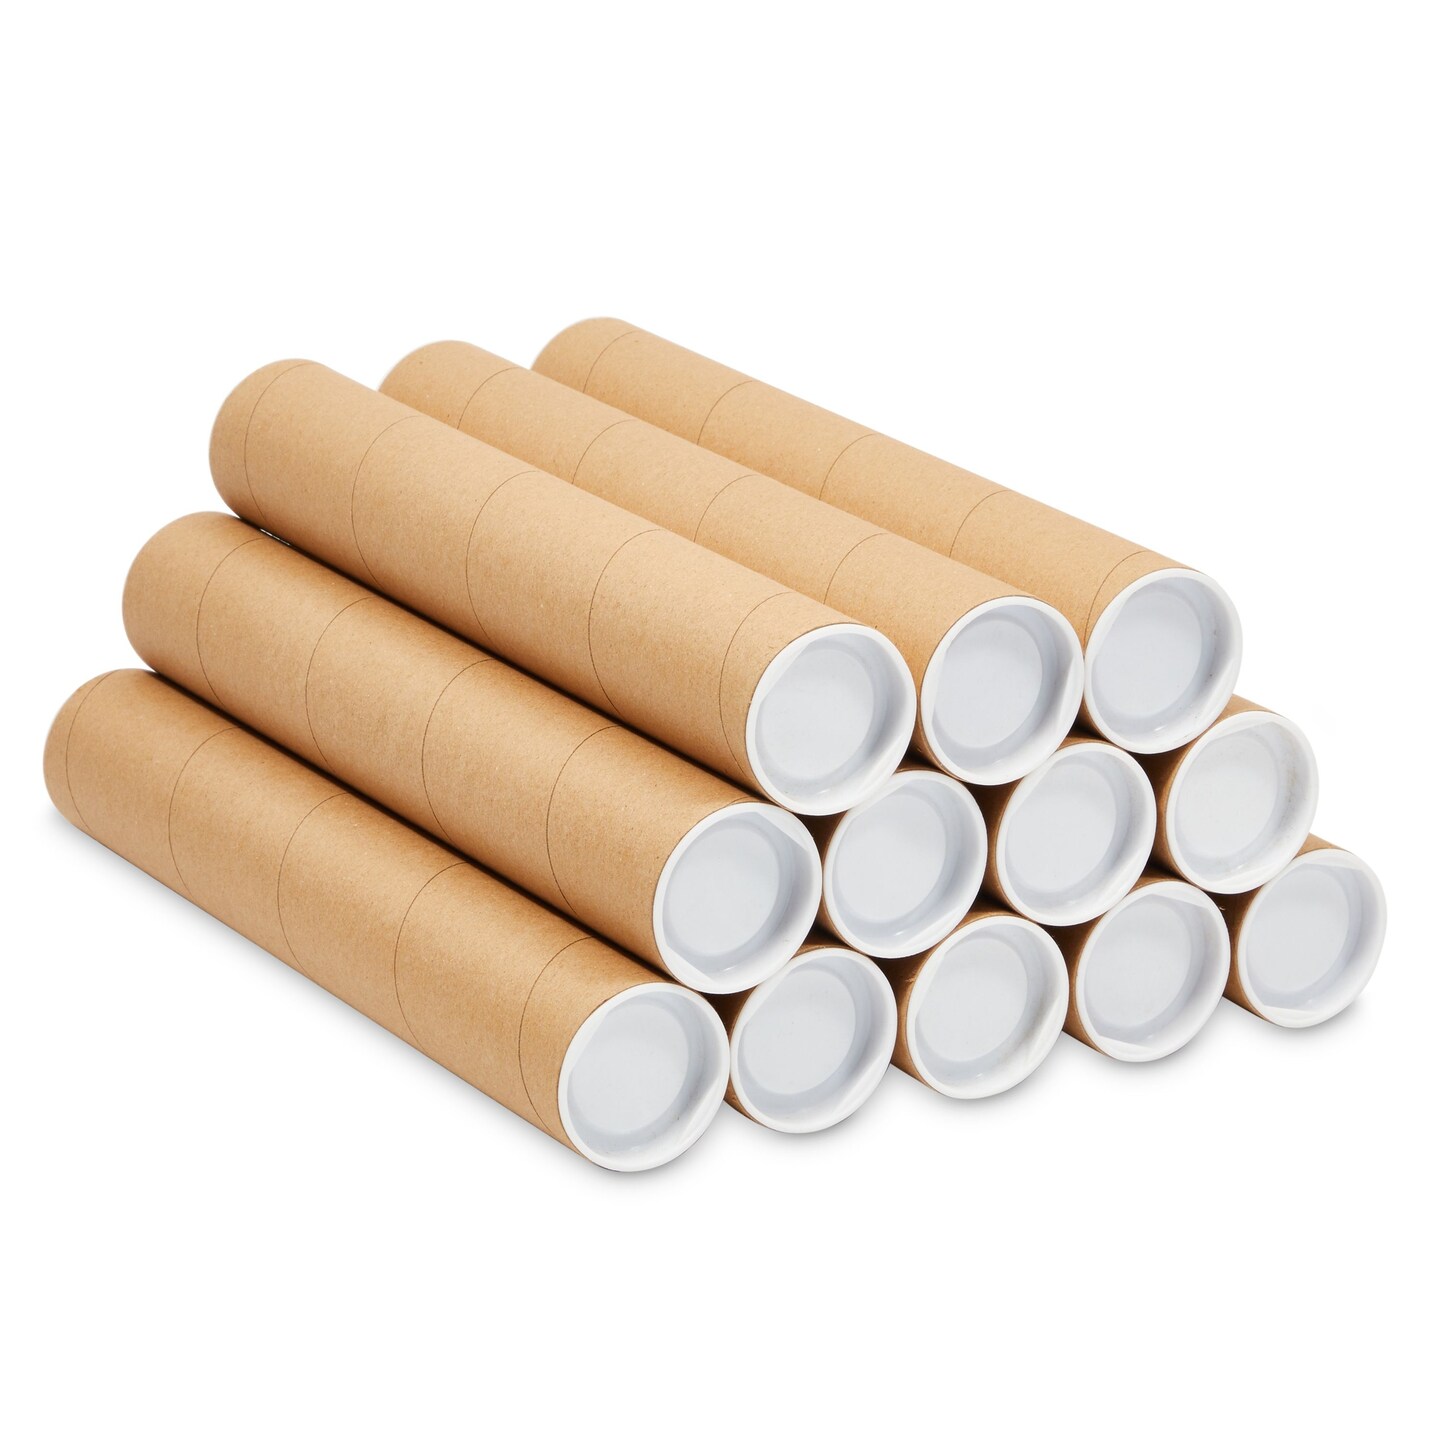 12-Pack Mailing Tubes with Caps, 2x12-Inch Kraft Paper Poster Tube for  Shipping, Packing, Bulk Round Packaging, Cardboard Mailers, Art Prints,  Maps, Blueprint (Brown)